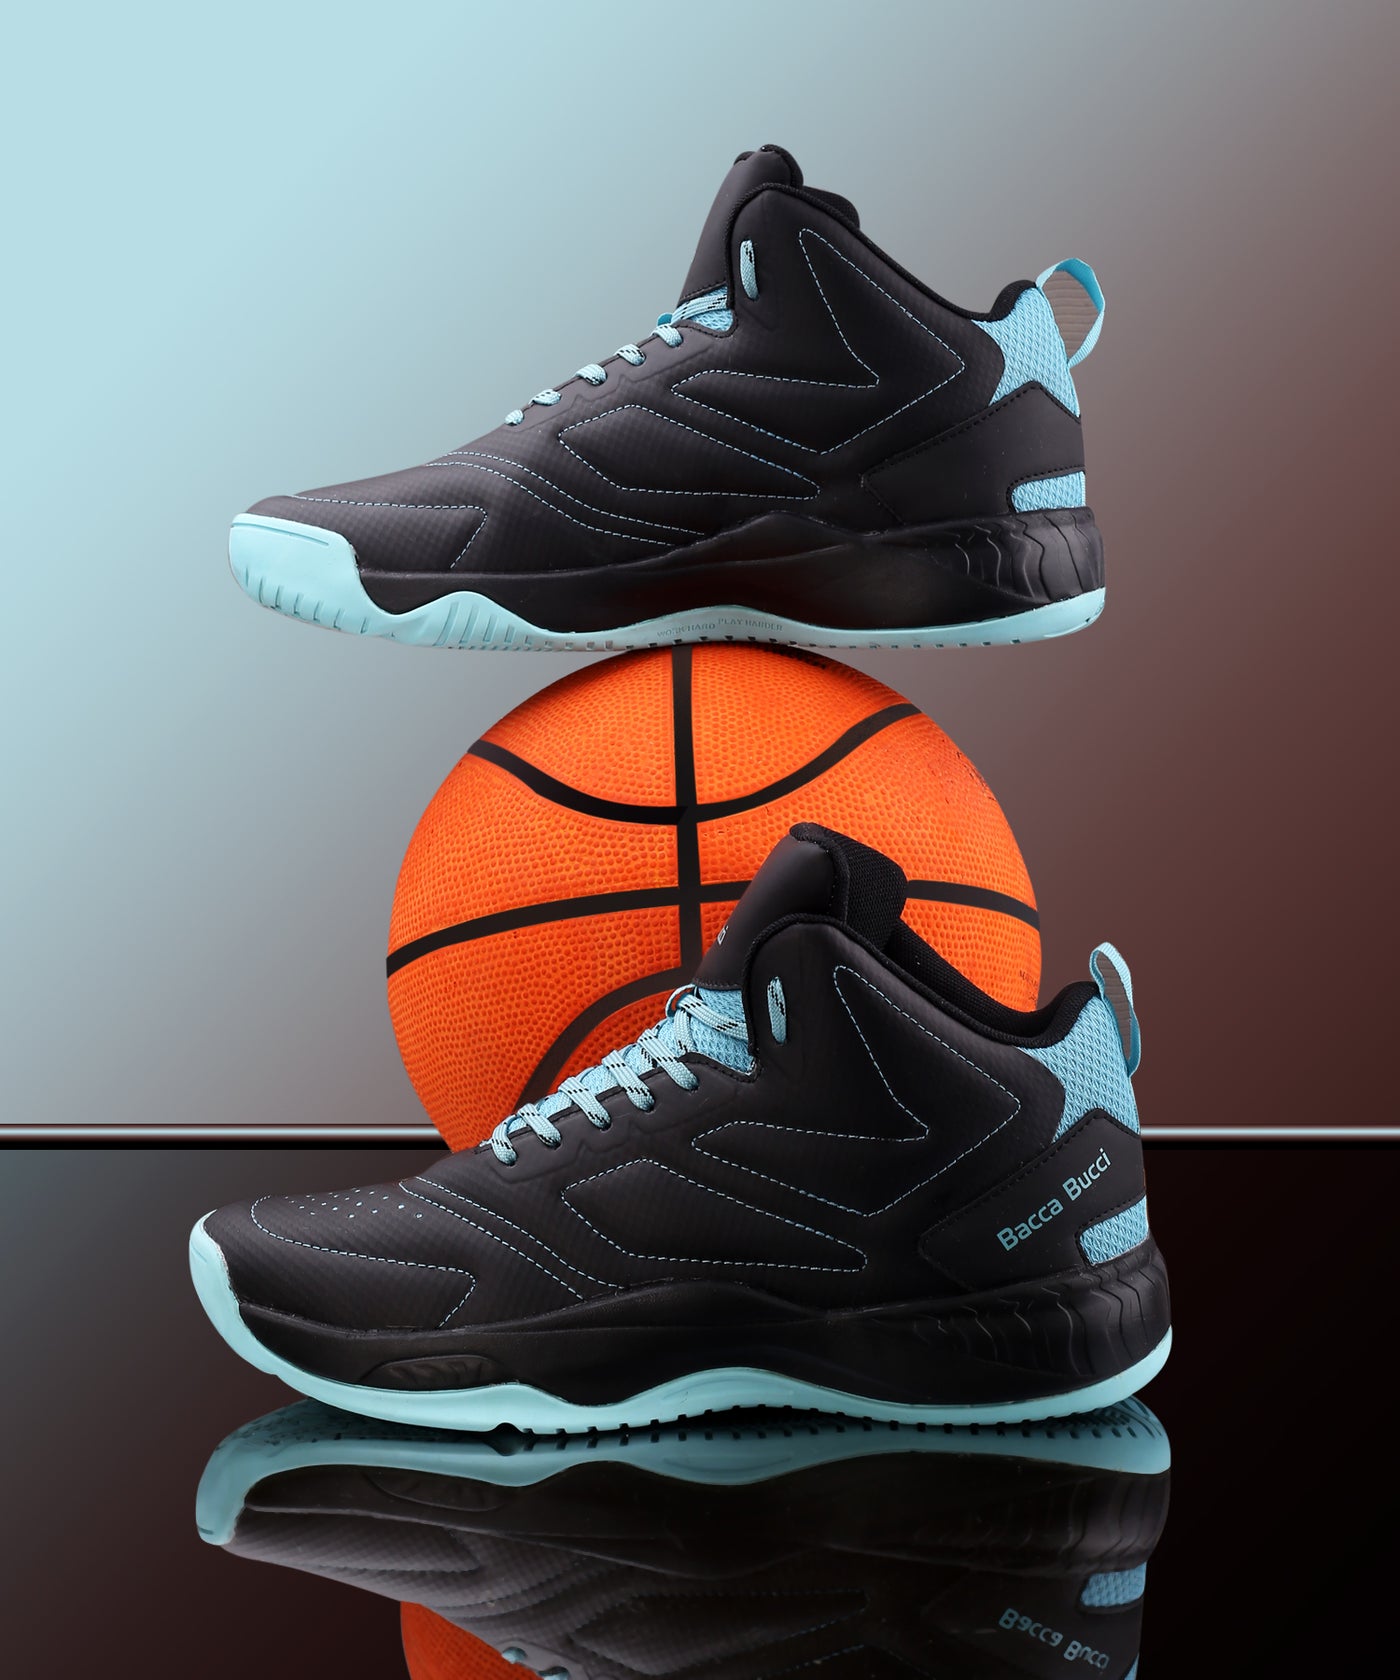 Basketball Shoes by Bacca Bucci